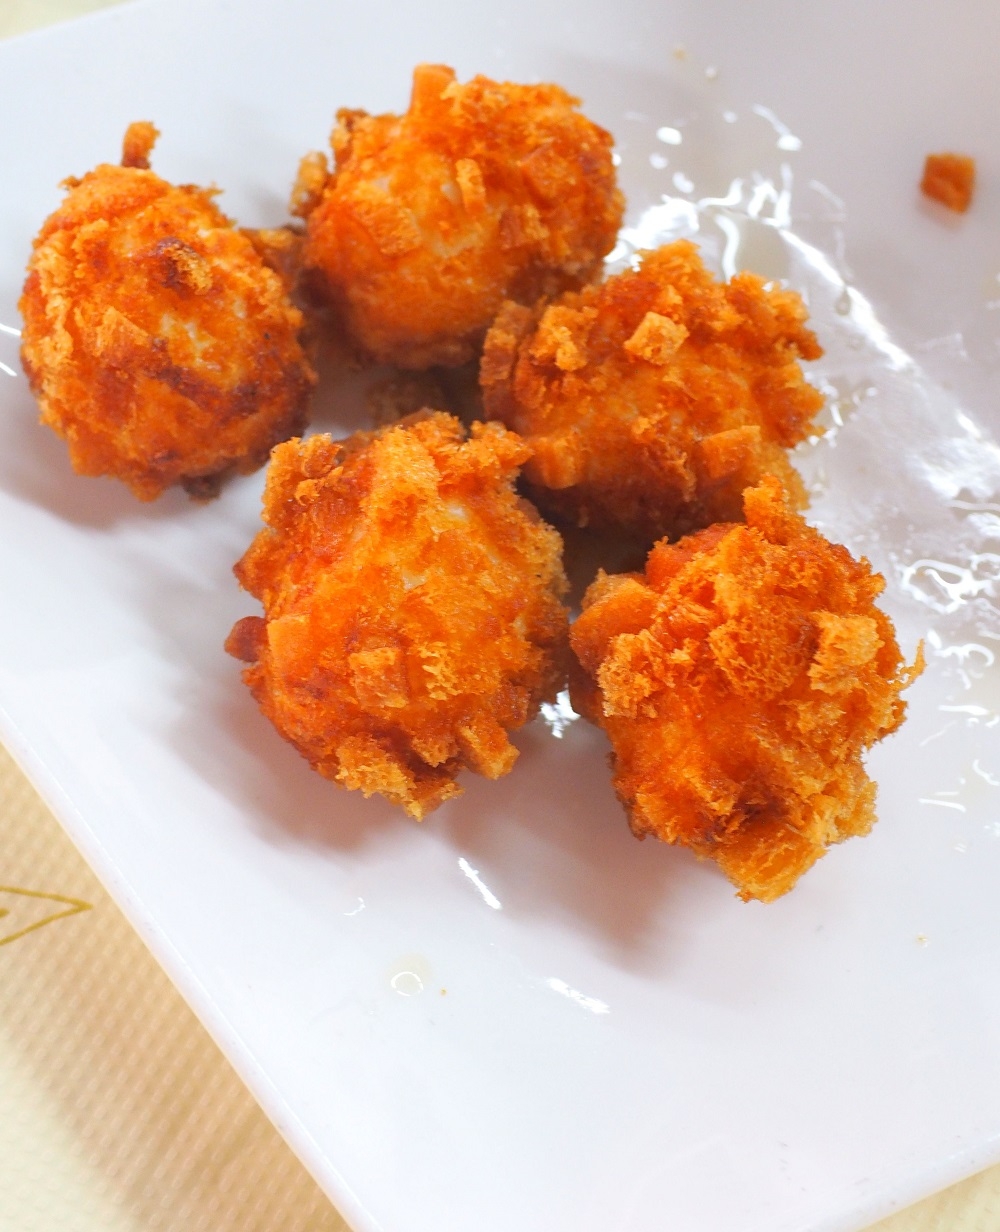 Even the unassuming sotong ball is well executed here with a contrast of bouncy texture and ultra light, crispy crust.